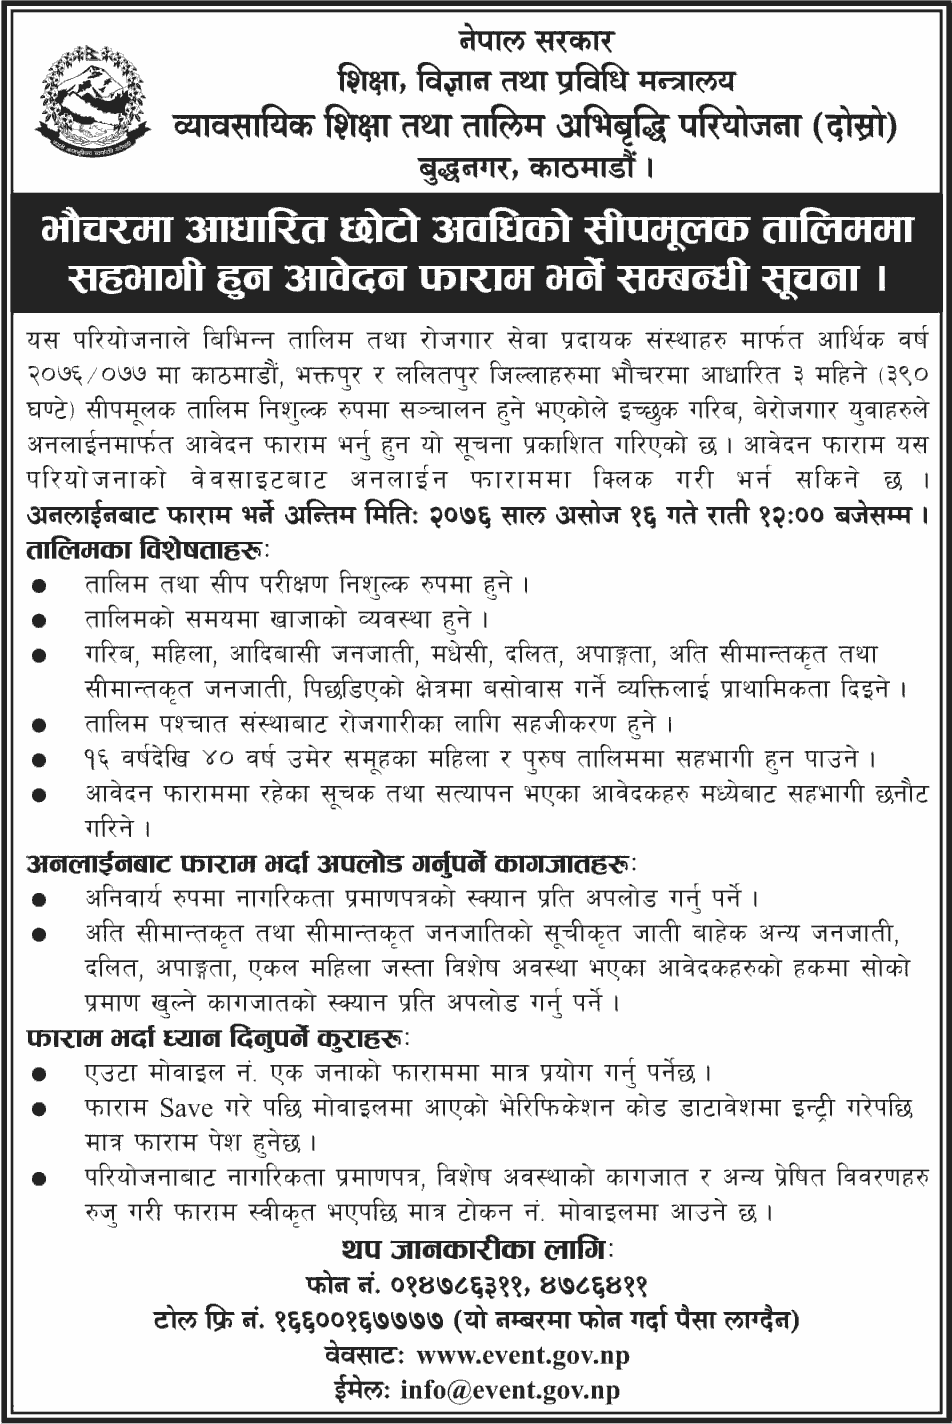 Free Training Programs Notice from Ministry of Education